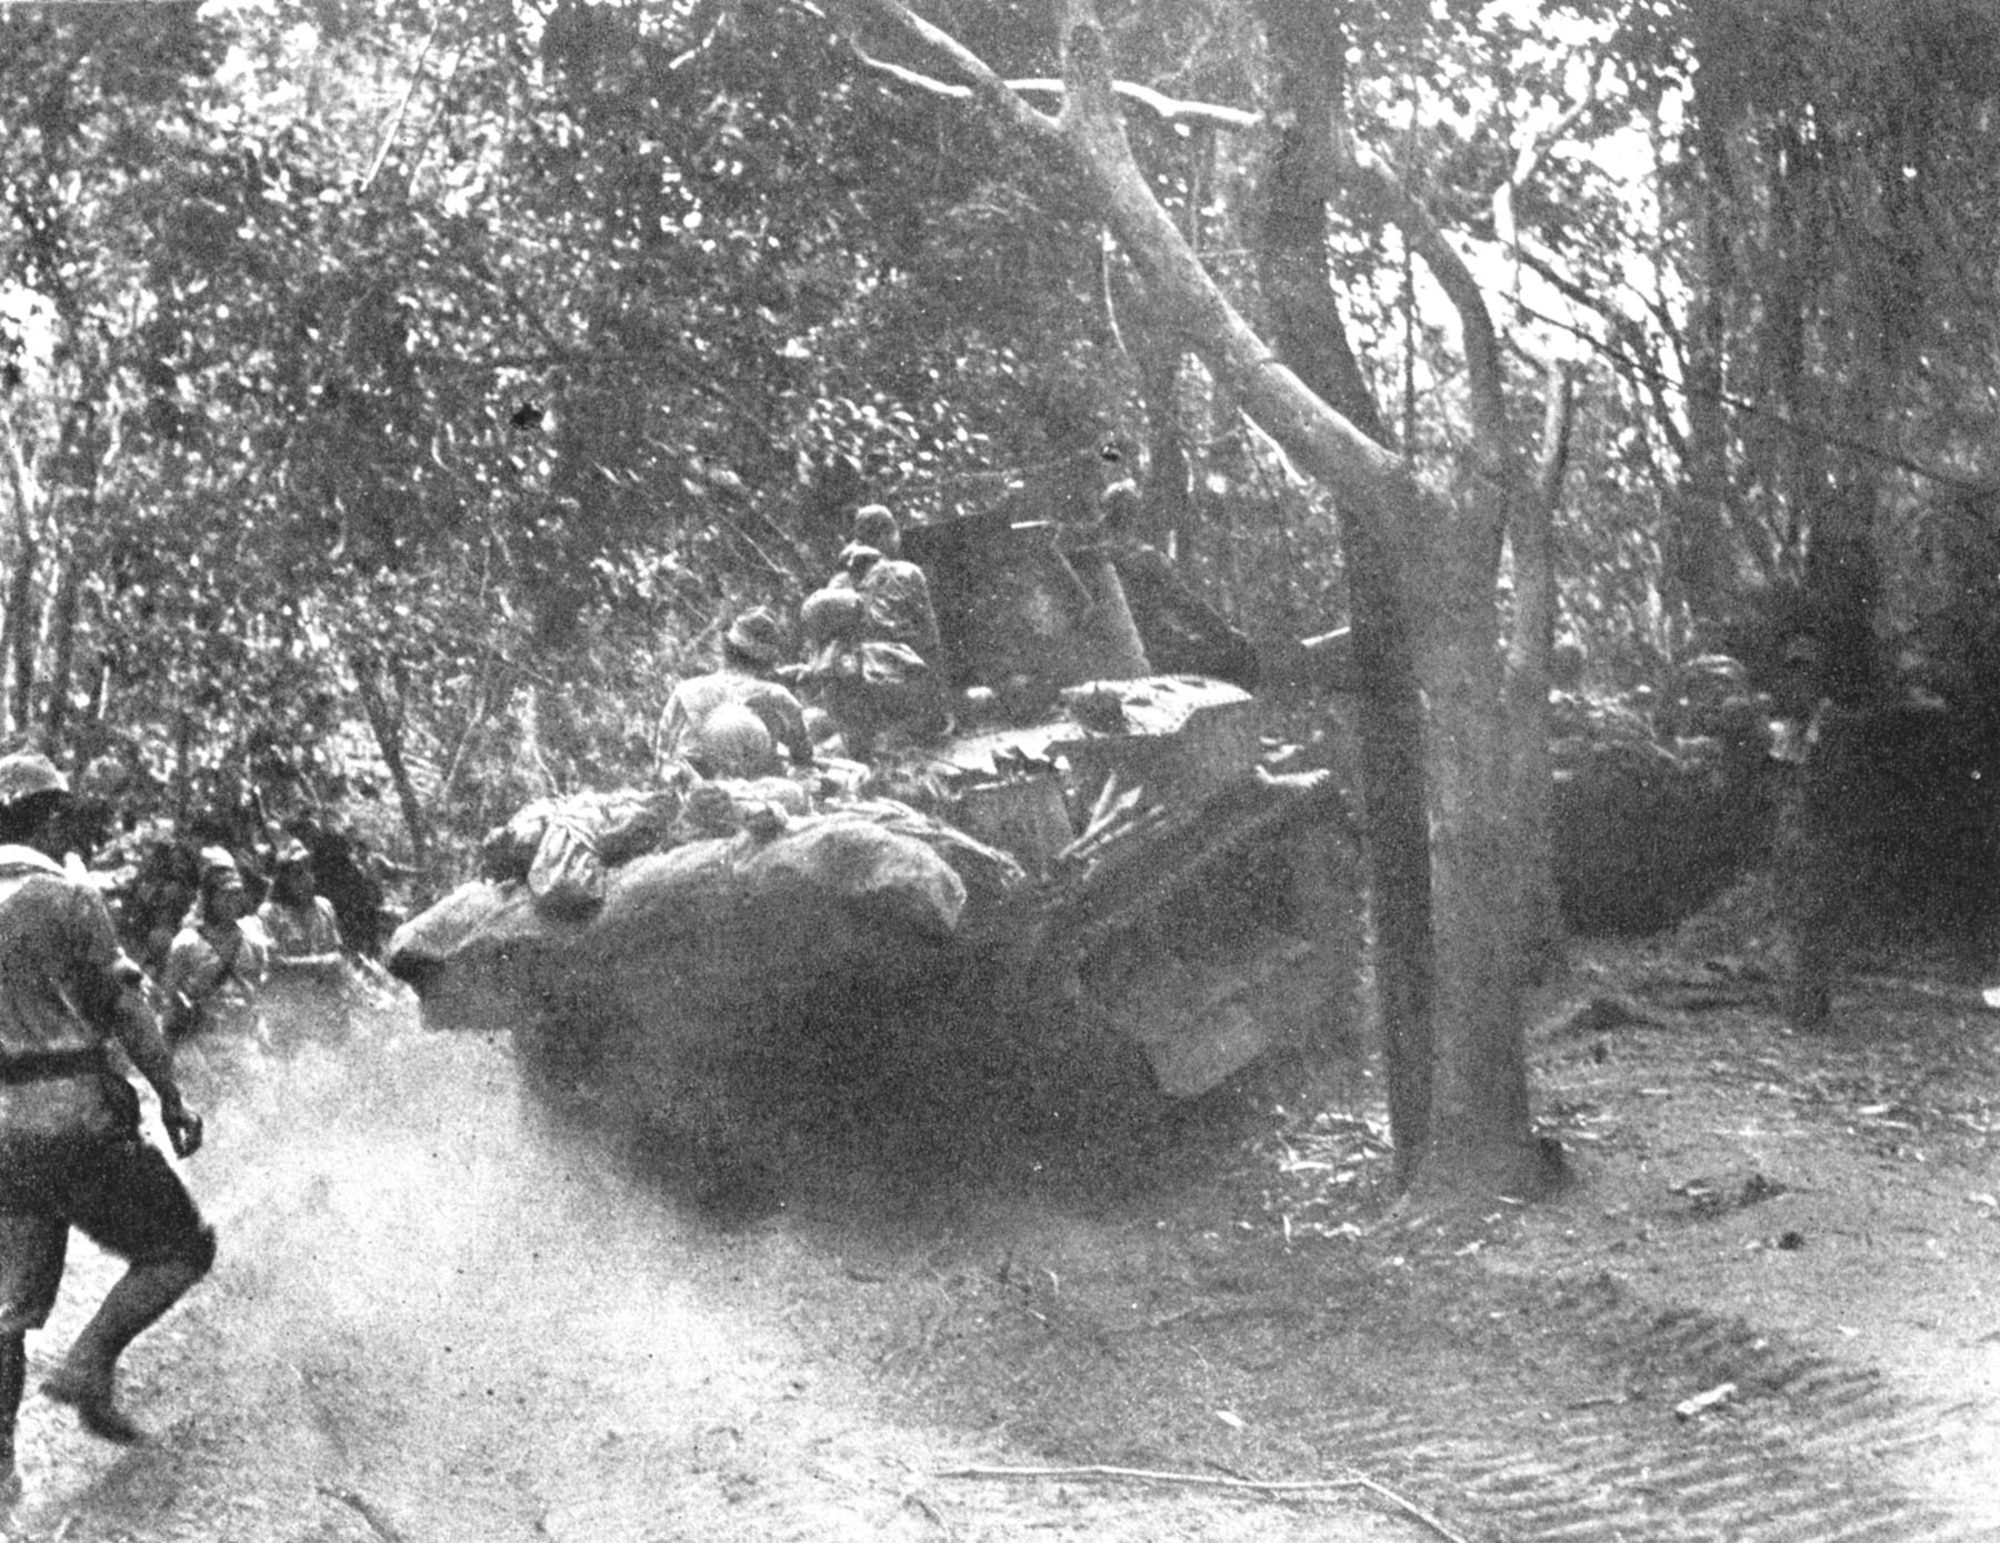 Japanese tank moving forward on Bataan. Without anti-tank weapons, the PACR was helpless to stop an armored attack. (U.S. Air Force photo)